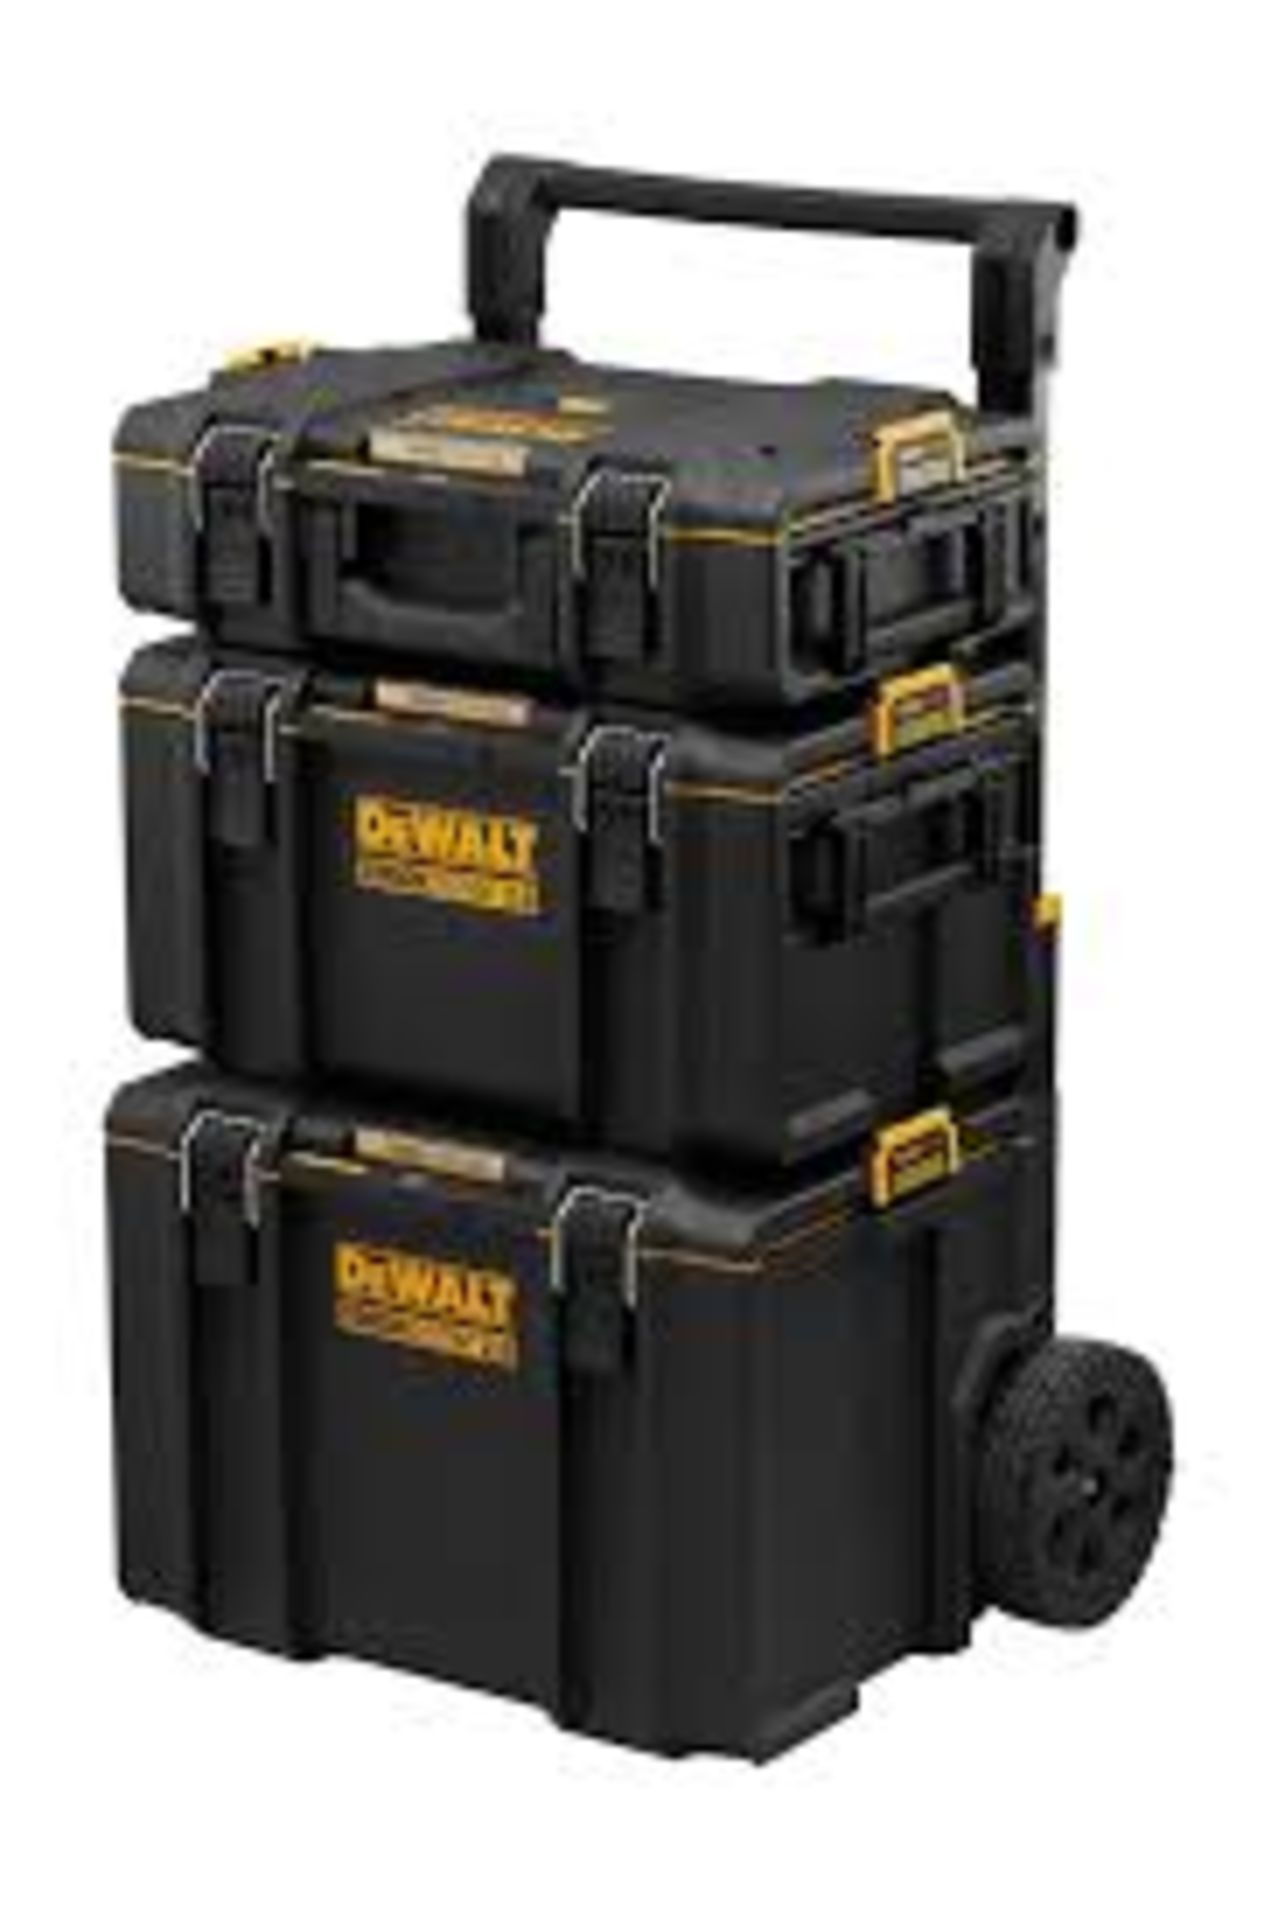 DEWALT TOUGHSYSTEM 2 STORAGE TOWER. - R14.14. Storage system that protects tools from the toughest